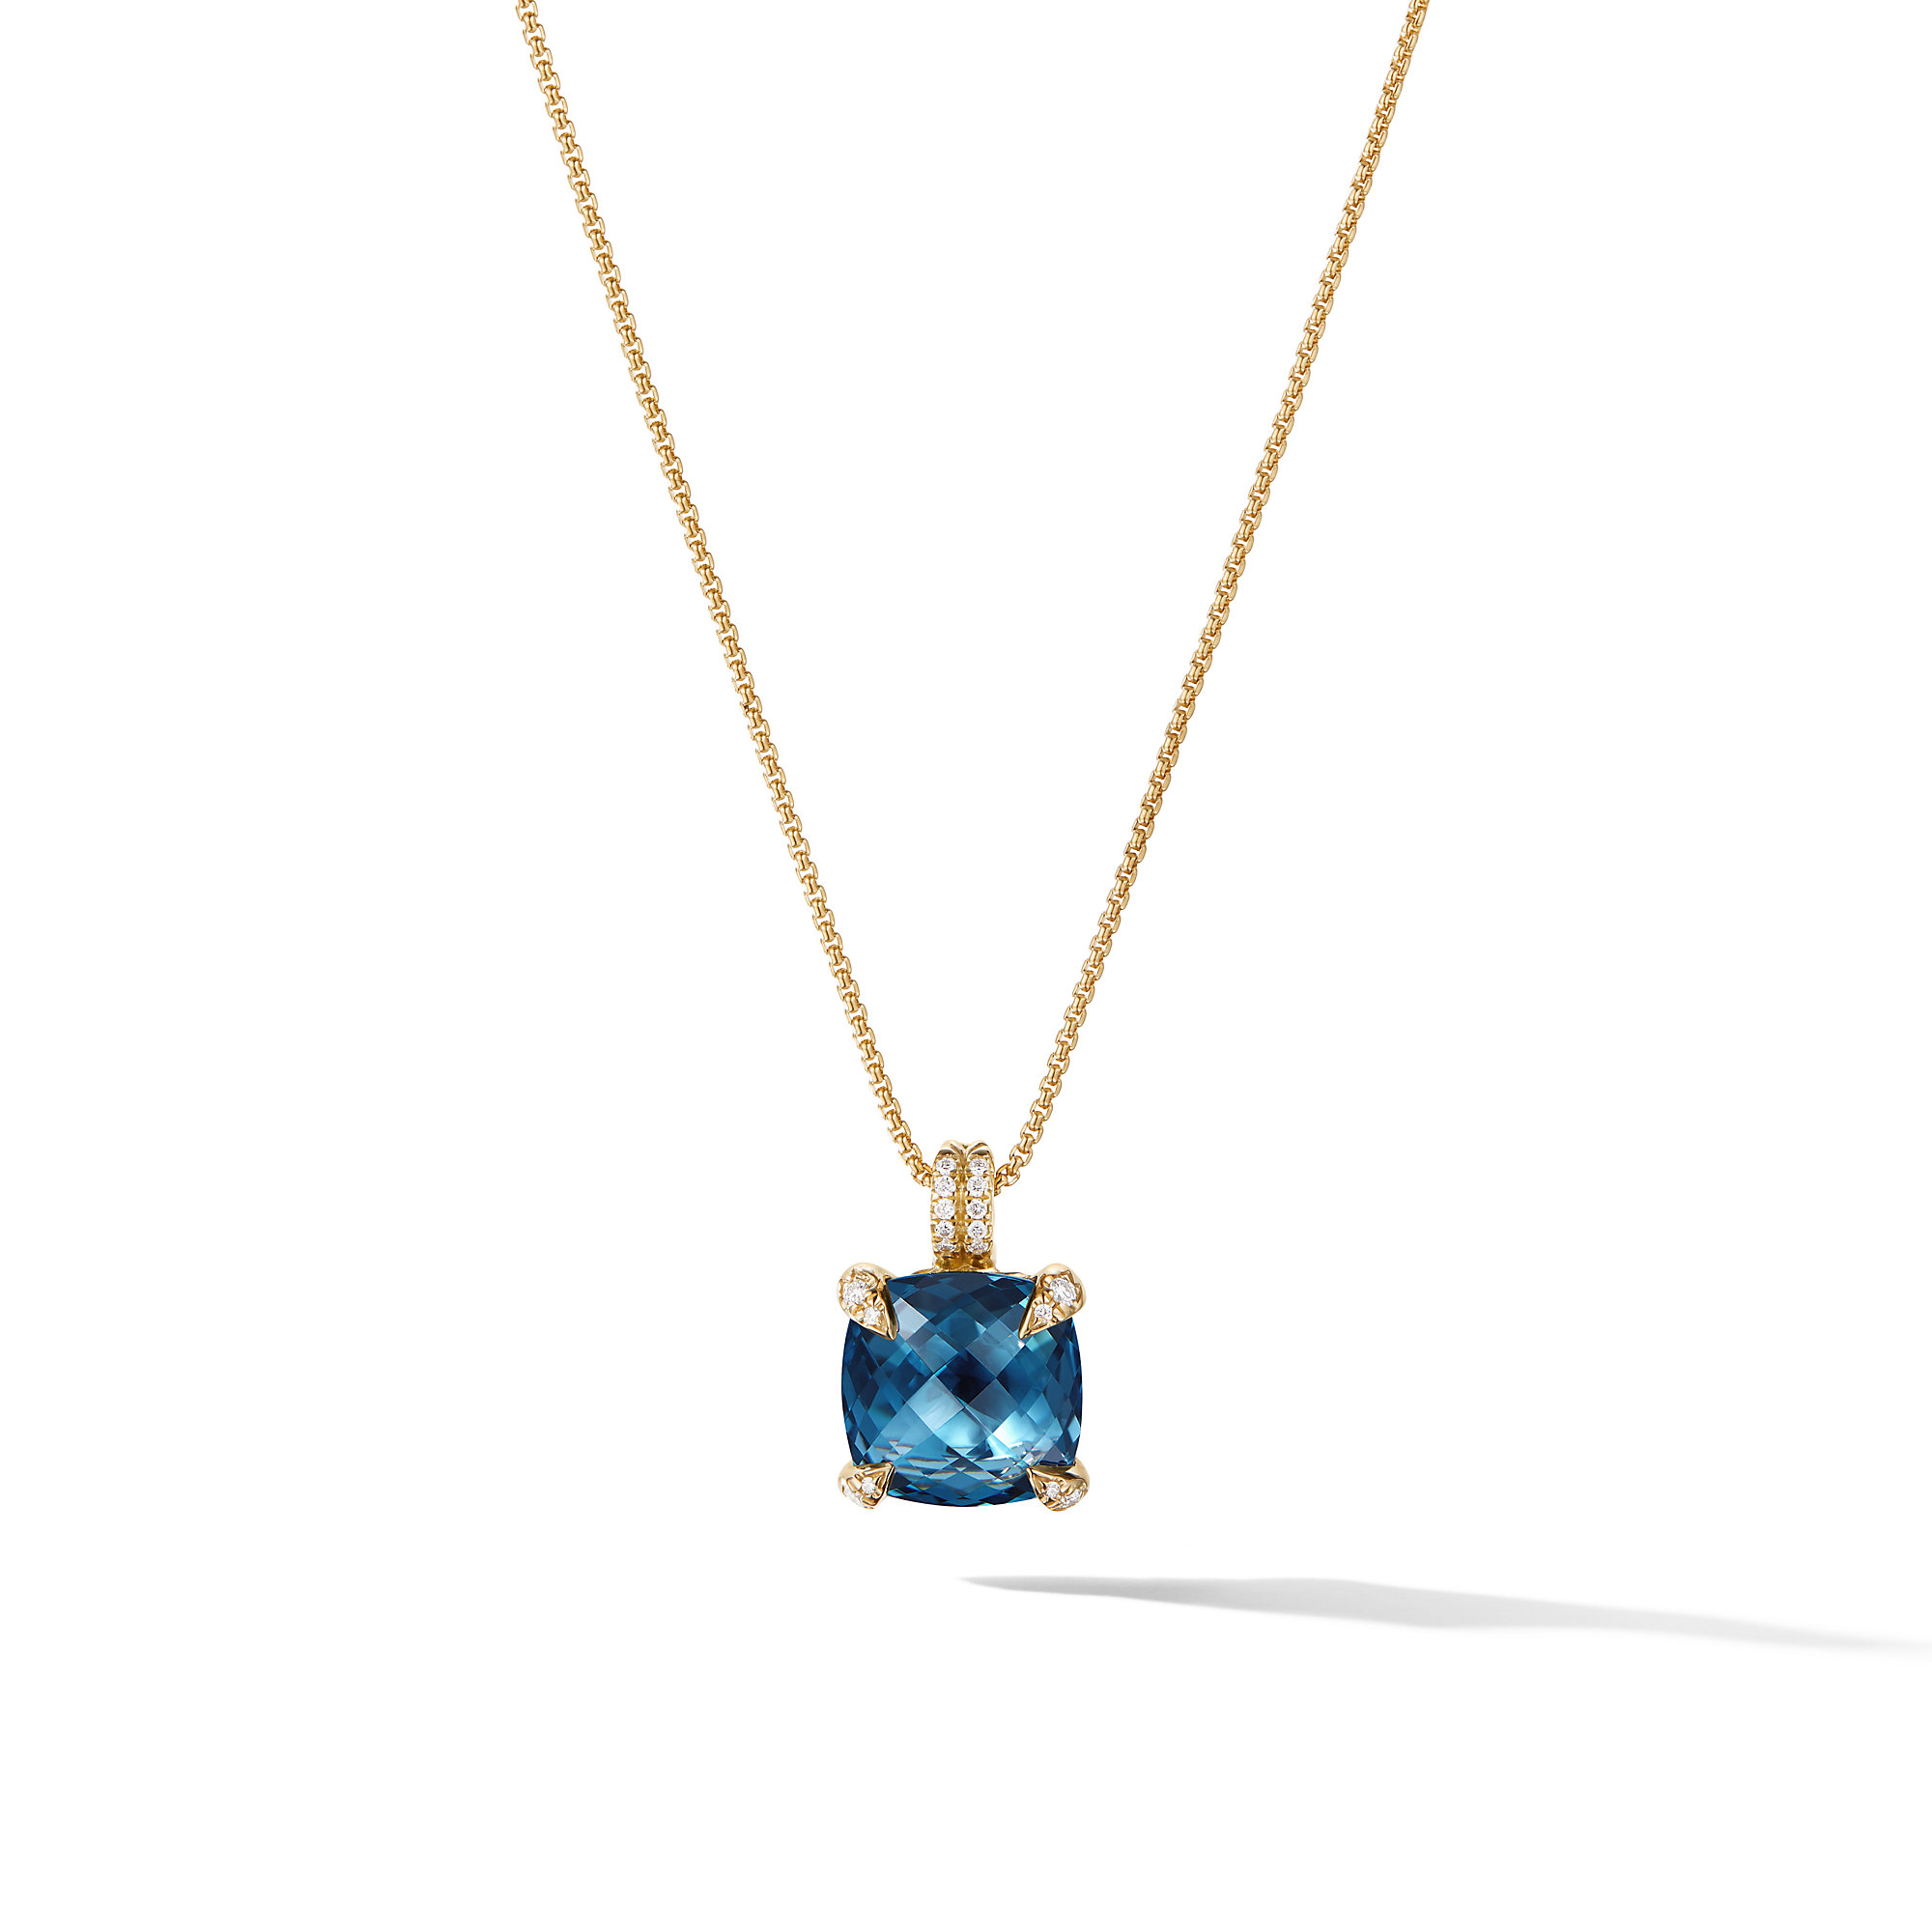 Pendant Necklace with Hampton Blue Topaz and Diamonds in 18K Gold